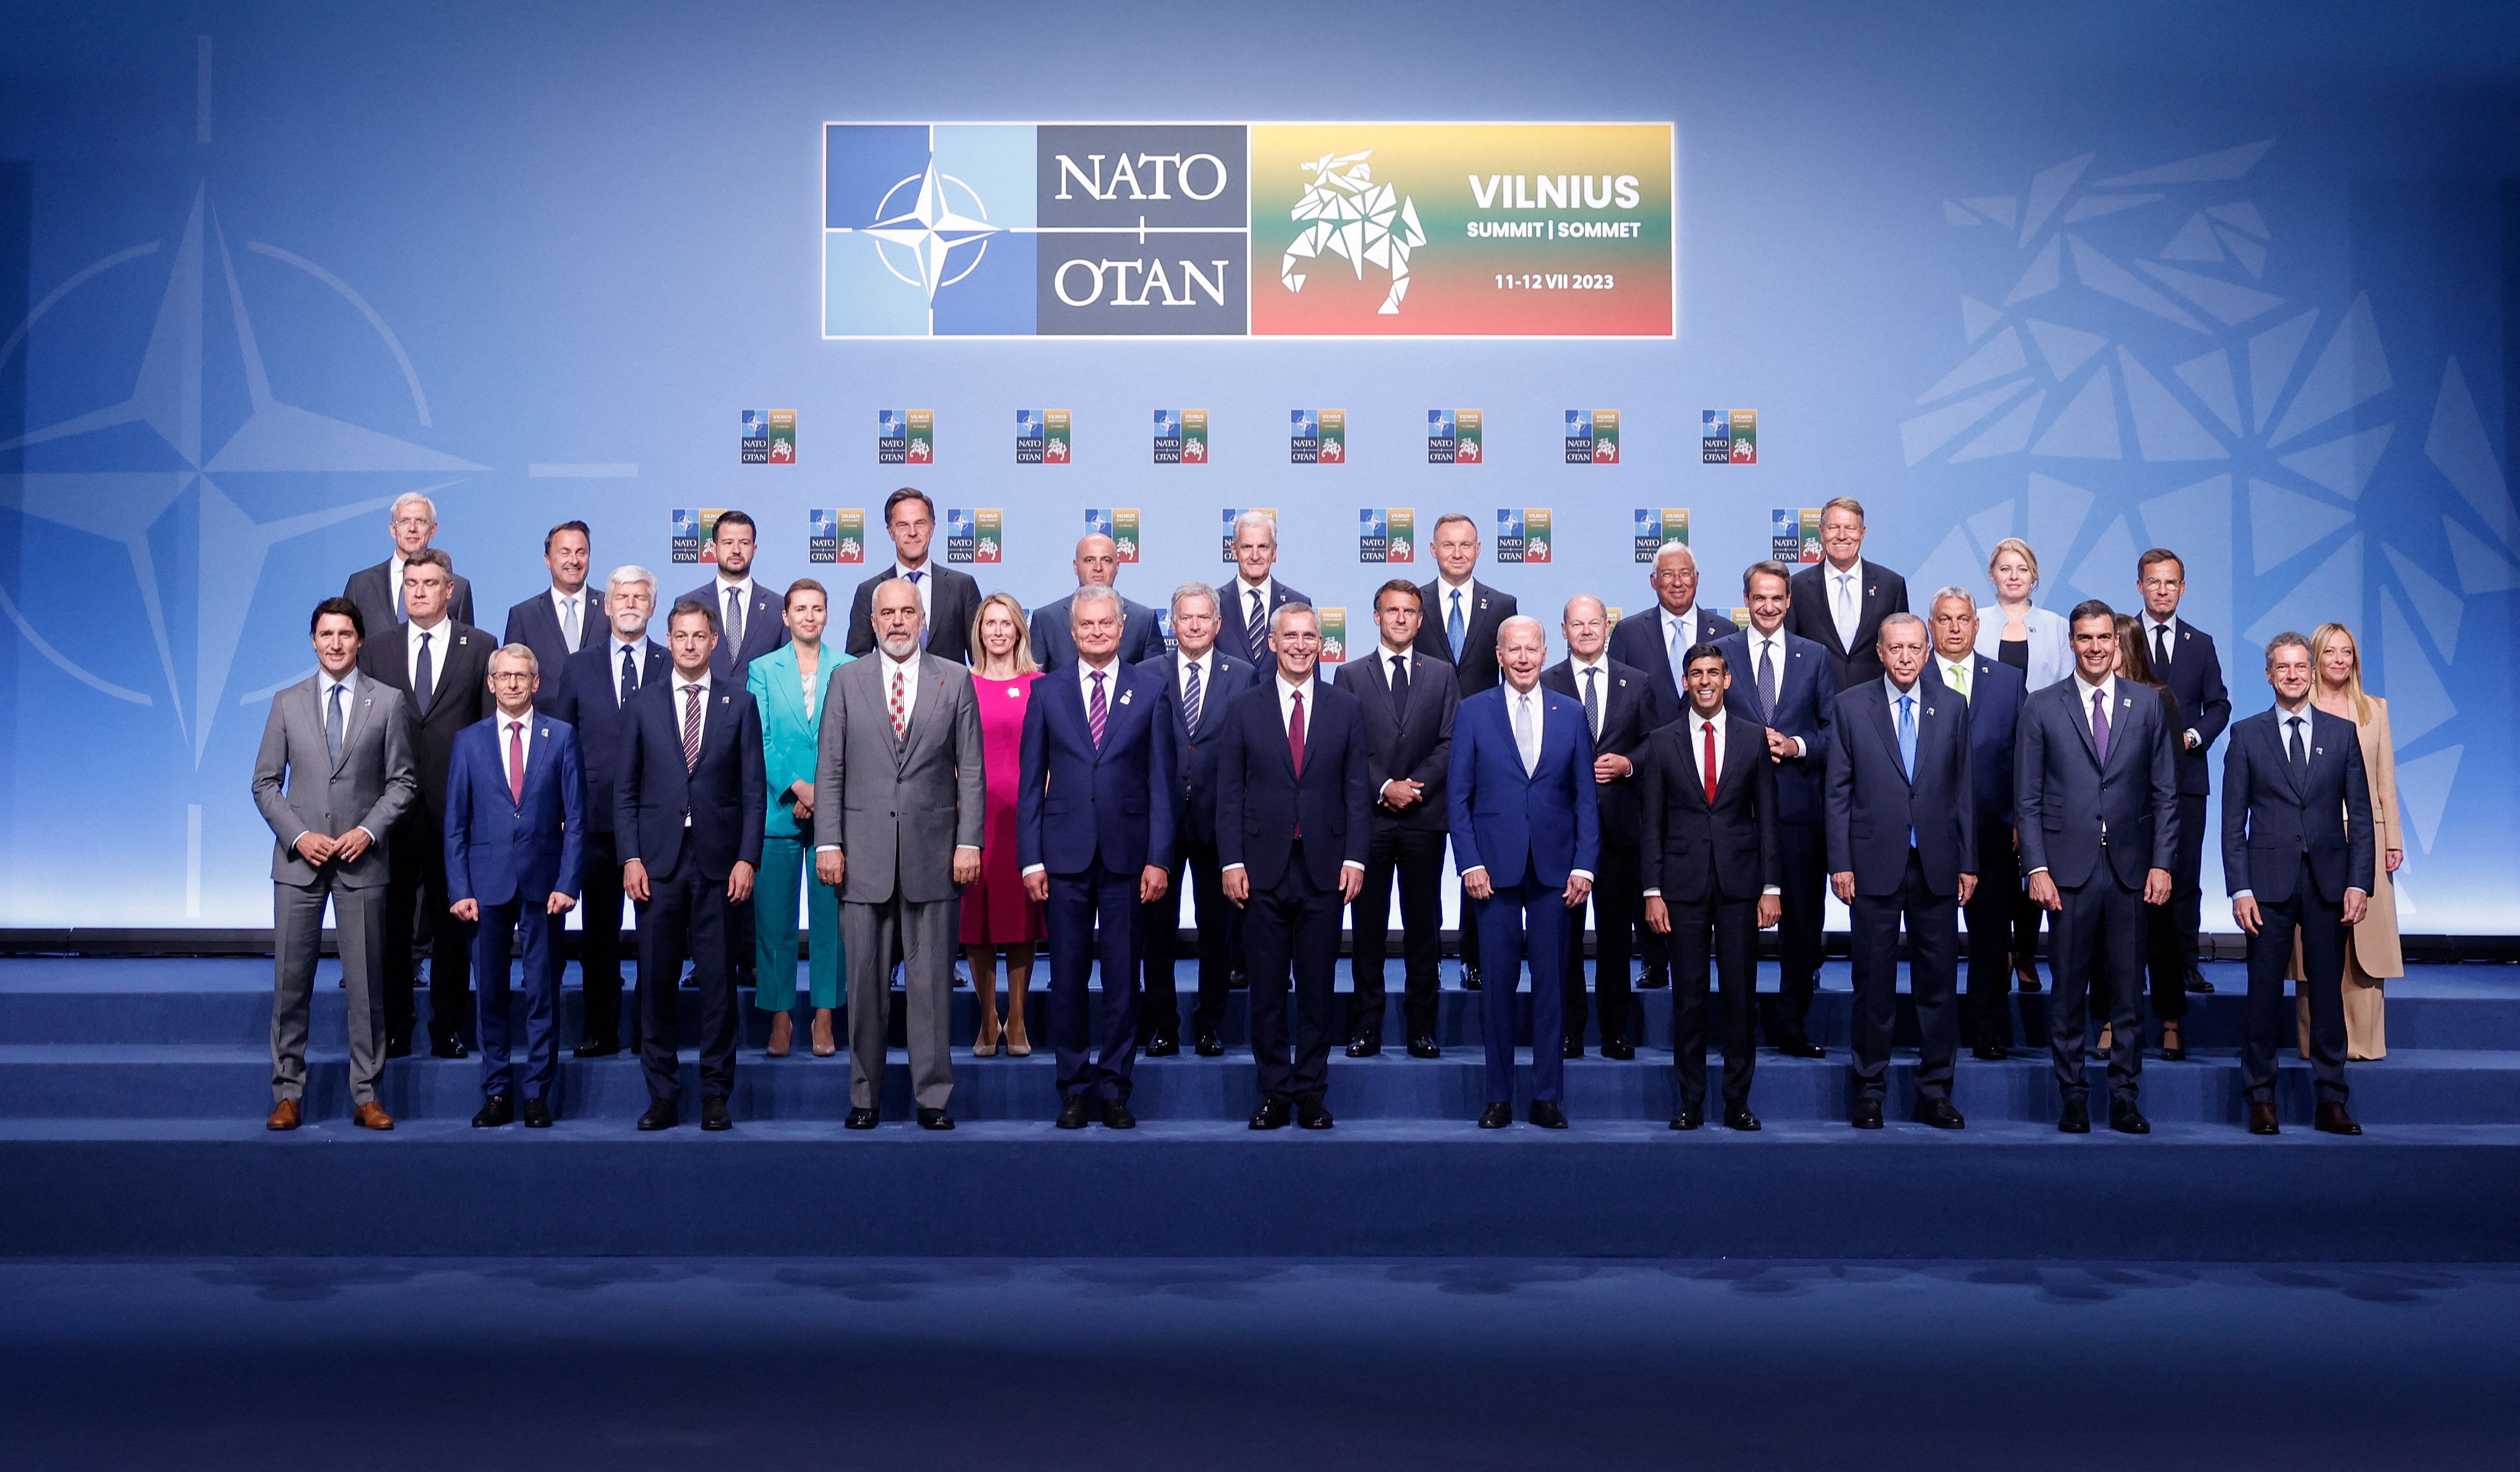 Participants of the NATO Summit pose for a photo in Vilnius, Lithuania, on Tuesday.